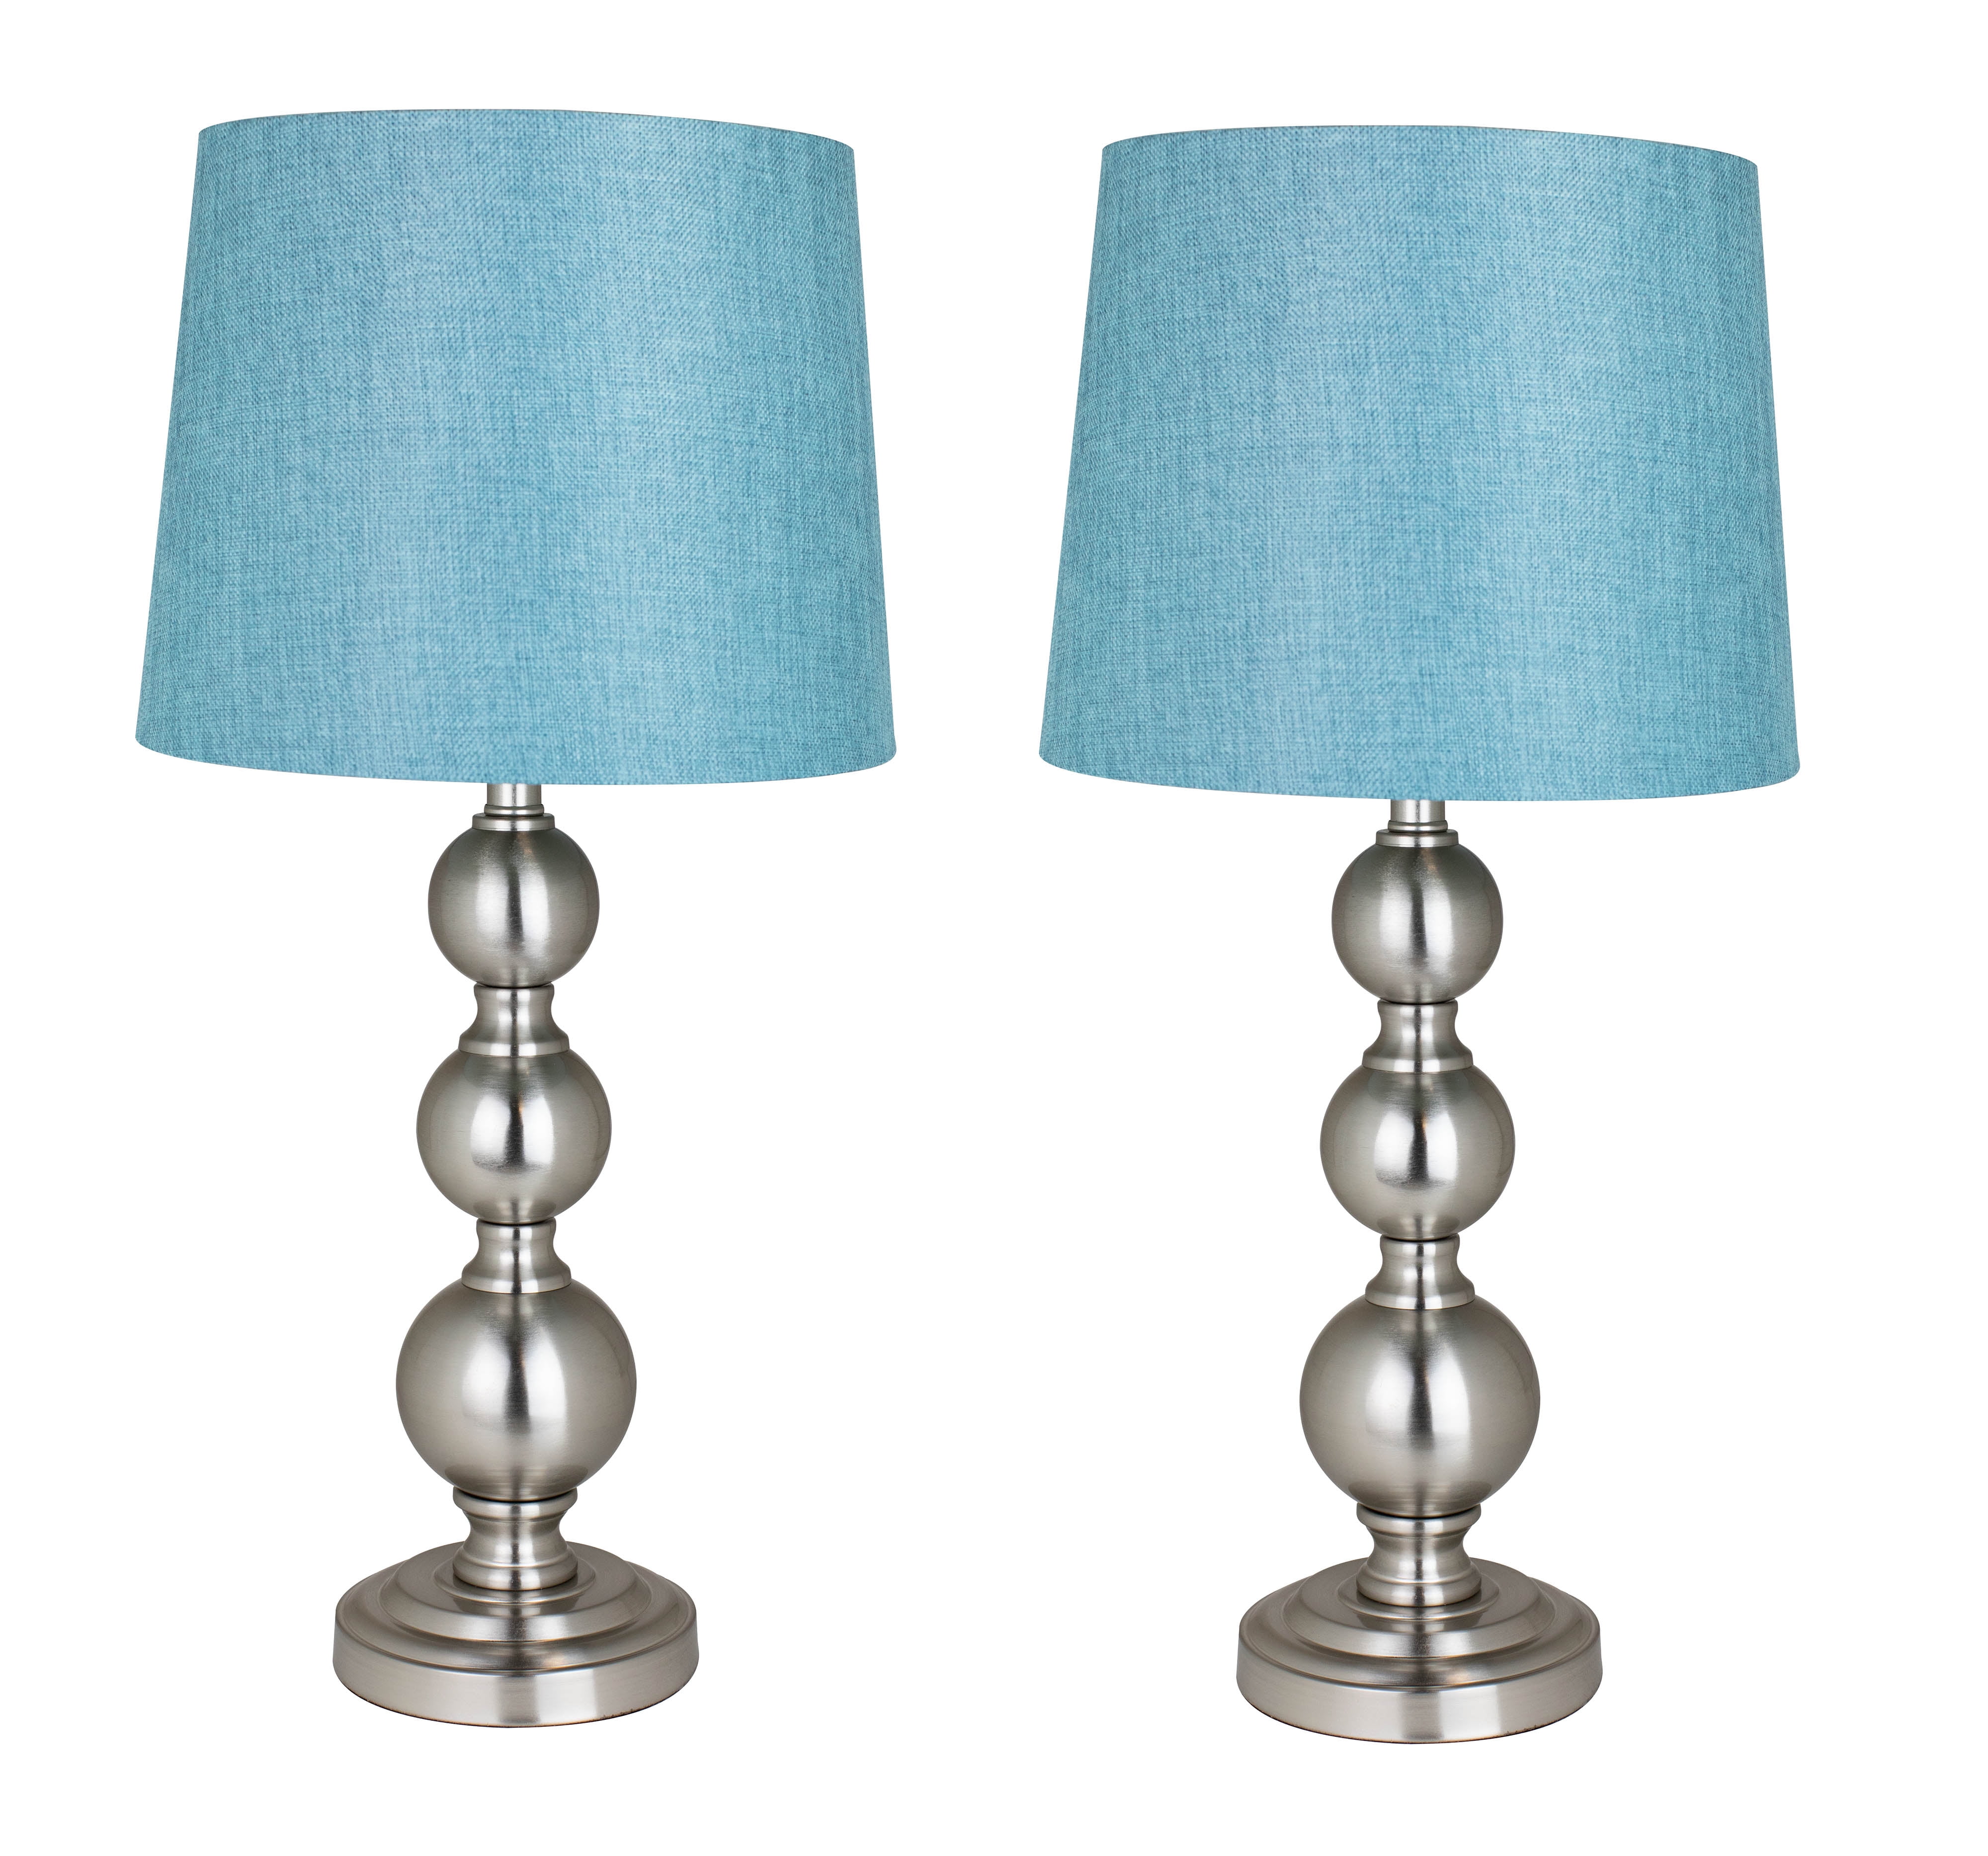 Table Lamps Turquoise, Tall Modern Table Lamps